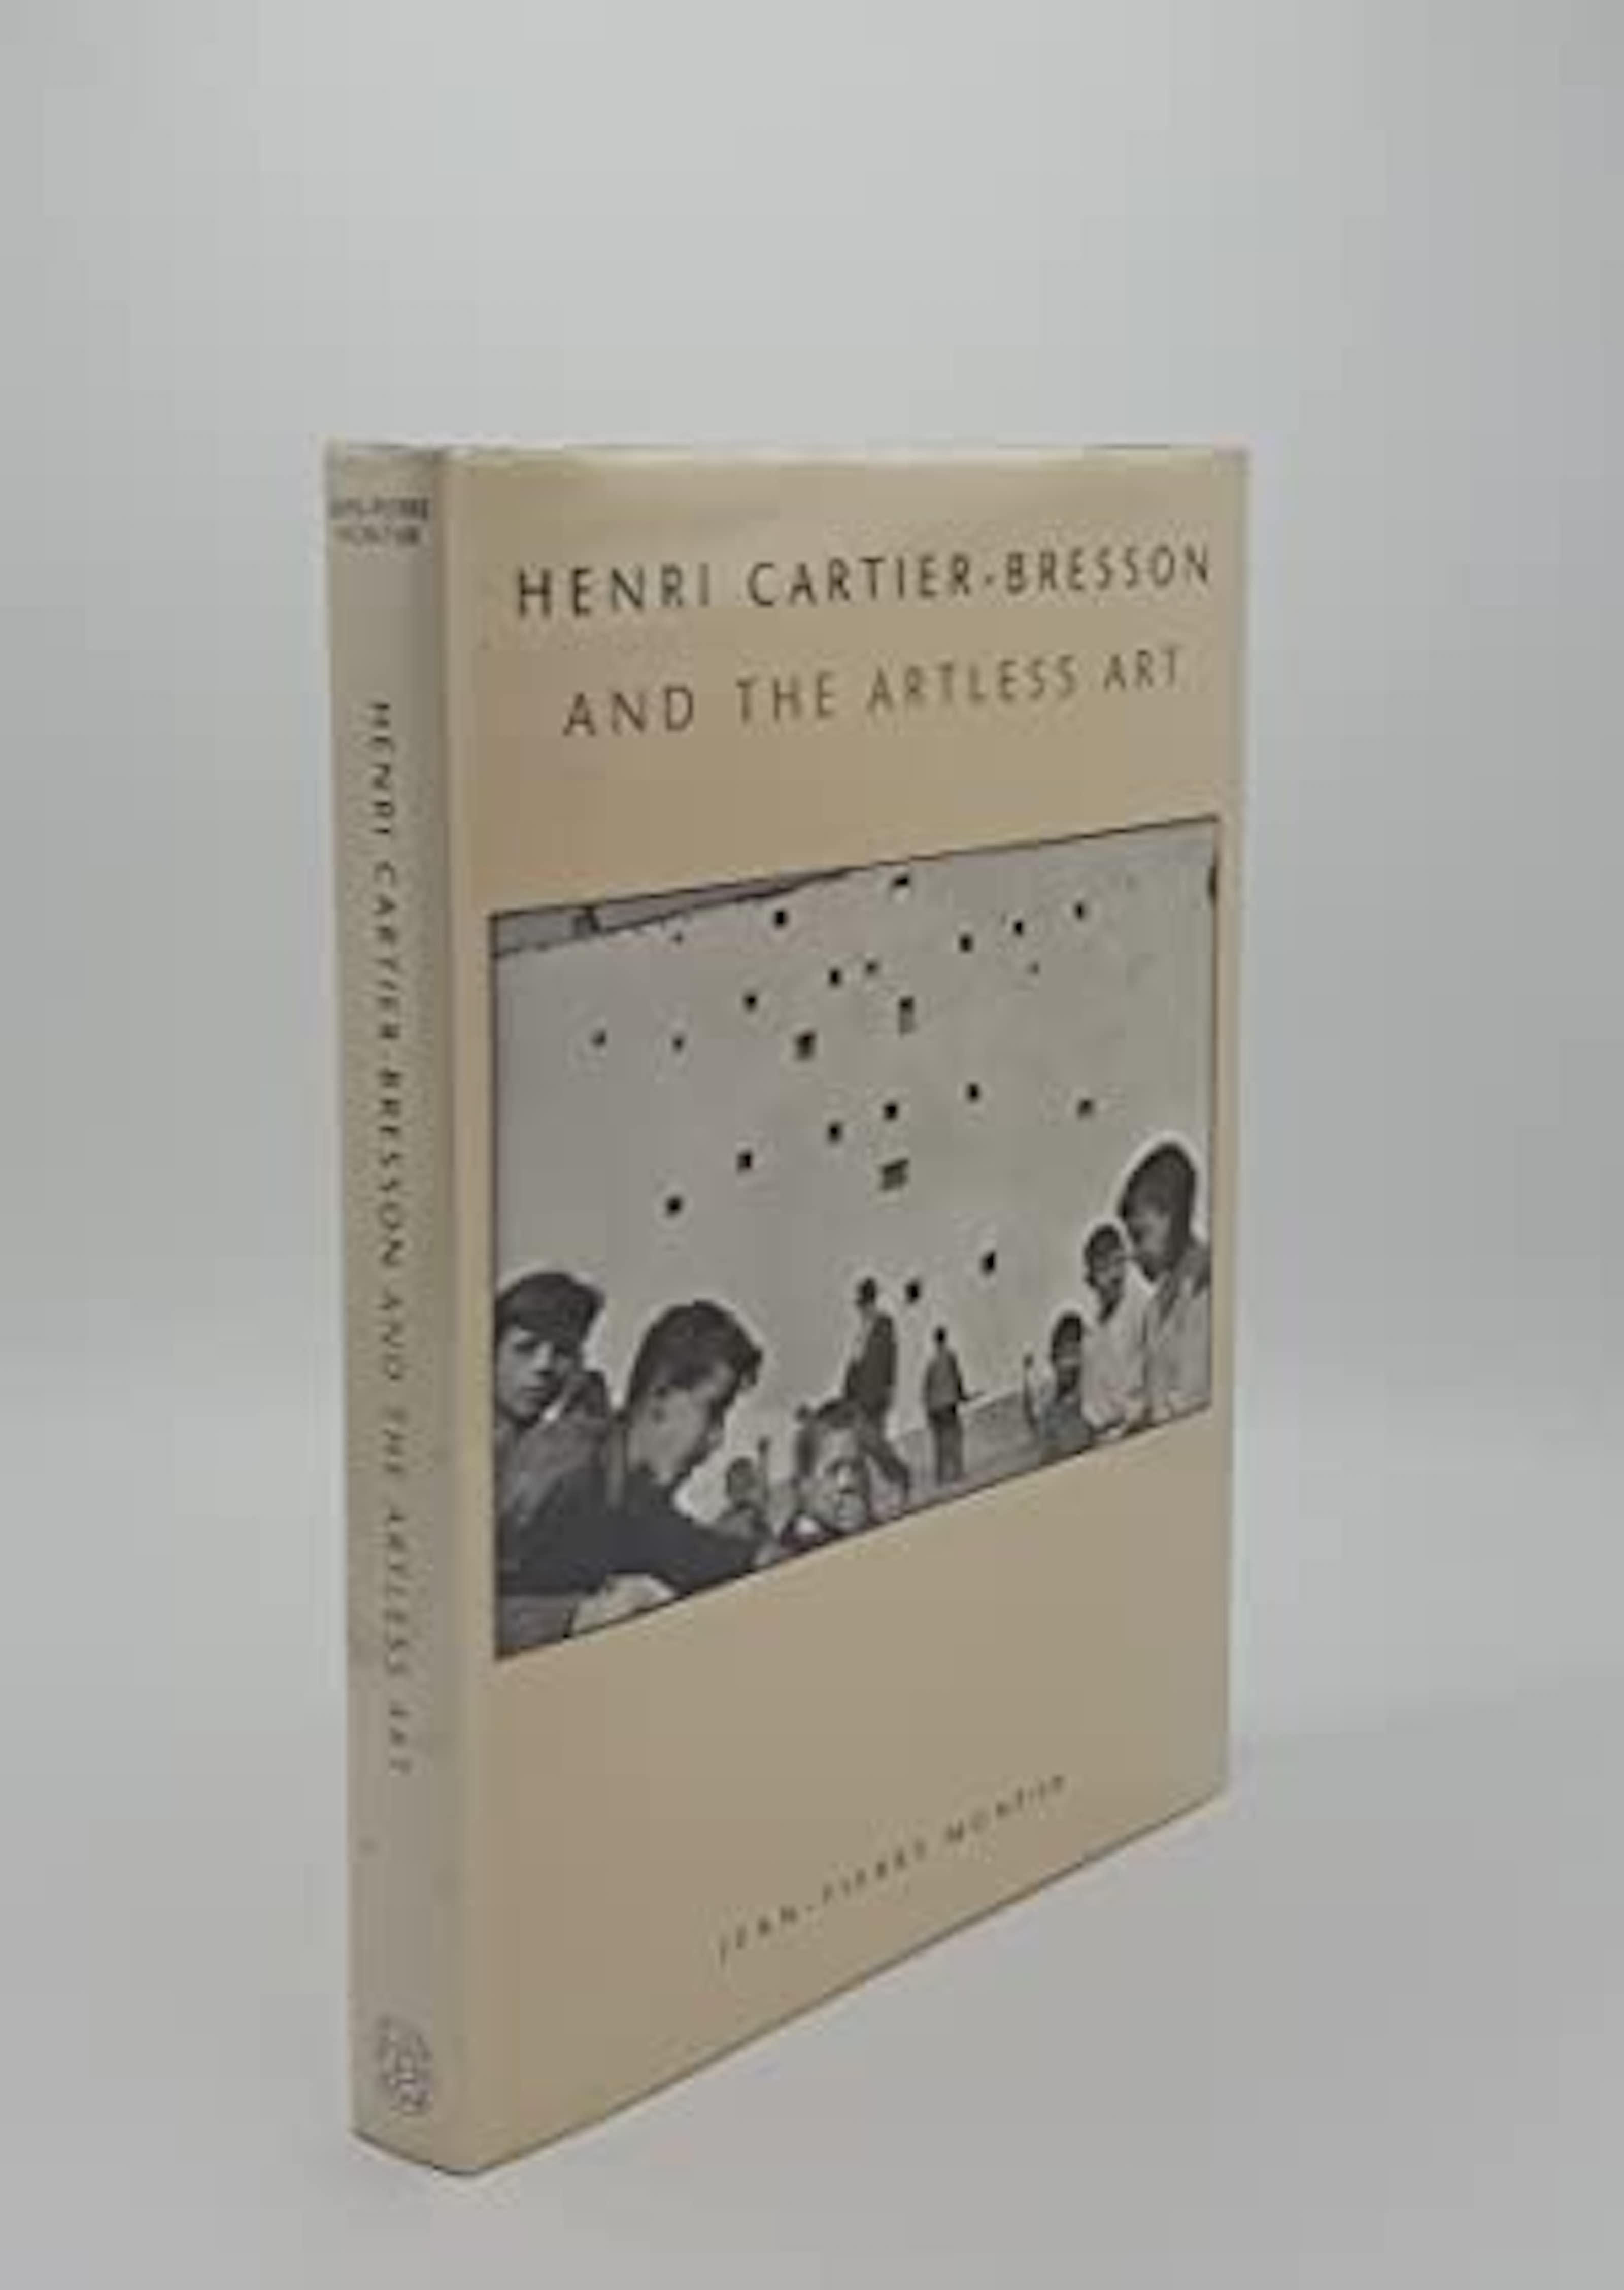 Henri Cartier Bresson and the Artless Art by Jean-Pierre Montier
Published by Thames and Hudson, 1996. 

This beautifully curated book delves into Cartier-Bresson's iconic photographs that capture the essence of human emotion, movement, and